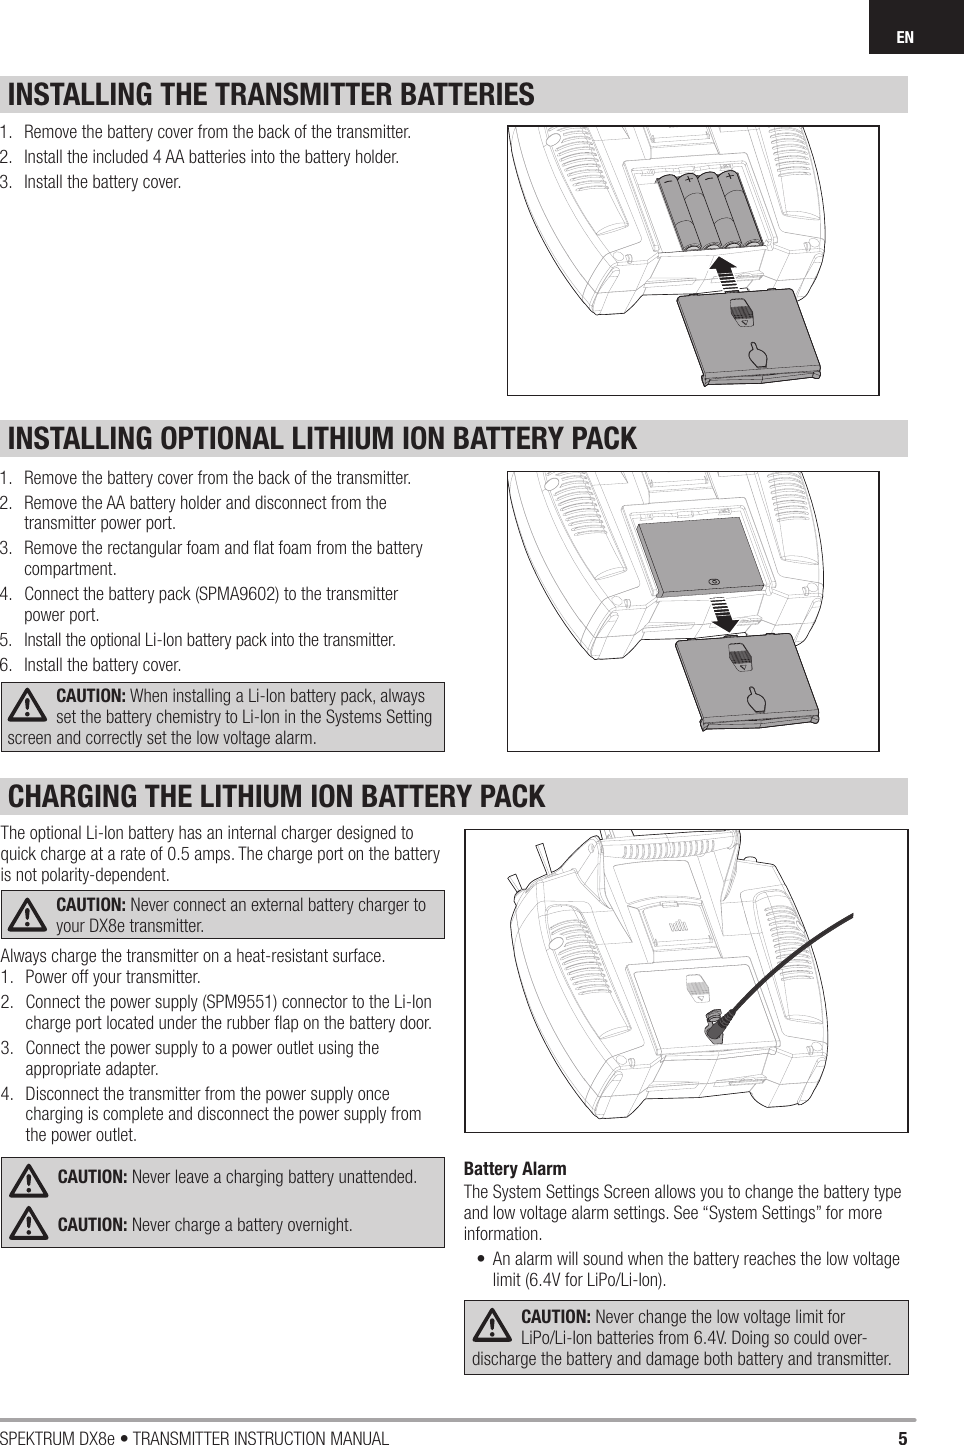 5SPEKTRUM DX8e • TRANSMITTER INSTRUCTION MANUALENINSTALLING OPTIONAL LITHIUM ION BATTERY PACKINSTALLING THE TRANSMITTER BATTERIES1.  Remove the battery cover from the back of the transmitter.2.  Remove the AA battery holder and disconnect from the transmitter power port.3.  Remove the rectangular foam and ﬂ at foam from the battery compartment.4.  Connect the battery pack (SPMA9602) to the transmitter power port.5.  Install the optional Li-Ion battery pack into the transmitter.6.  Install the battery cover.CAUTION: When installing a Li-Ion battery pack, always set the battery chemistry to Li-Ion in the Systems Setting screen and correctly set the low voltage alarm.1.  Remove the battery cover from the back of the transmitter.2.  Install the included 4 AA batteries into the battery holder.3.  Install the battery cover.The optional Li-Ion battery has an internal charger designed to quick charge at a rate of 0.5 amps. The charge port on the battery is not polarity-dependent. CAUTION: Never connect an external battery charger to your DX8e transmitter. Always charge the transmitter on a heat-resistant surface.1.  Power off your transmitter. 2.  Connect the power supply (SPM9551) connector to the Li-Ion charge port located under the rubber ﬂ ap on the battery door. 3.  Connect the power supply to a power outlet using the appropriate adapter. 4.  Disconnect the transmitter from the power supply once charging is complete and disconnect the power supply from the power outlet.CAUTION: Never leave a charging battery unattended.CAUTION: Never charge a battery overnight.Battery AlarmThe System Settings Screen allows you to change the battery type and low voltage alarm settings. See “System Settings” for more information.•  An alarm will sound when the battery reaches the low voltage limit (6.4V for LiPo/Li-Ion).CAUTION: Never change the low voltage limit for LiPo/Li-Ion batteries from 6.4V. Doing so could over-discharge the battery and damage both battery and transmitter.CHARGING THE LITHIUM ION BATTERY PACK